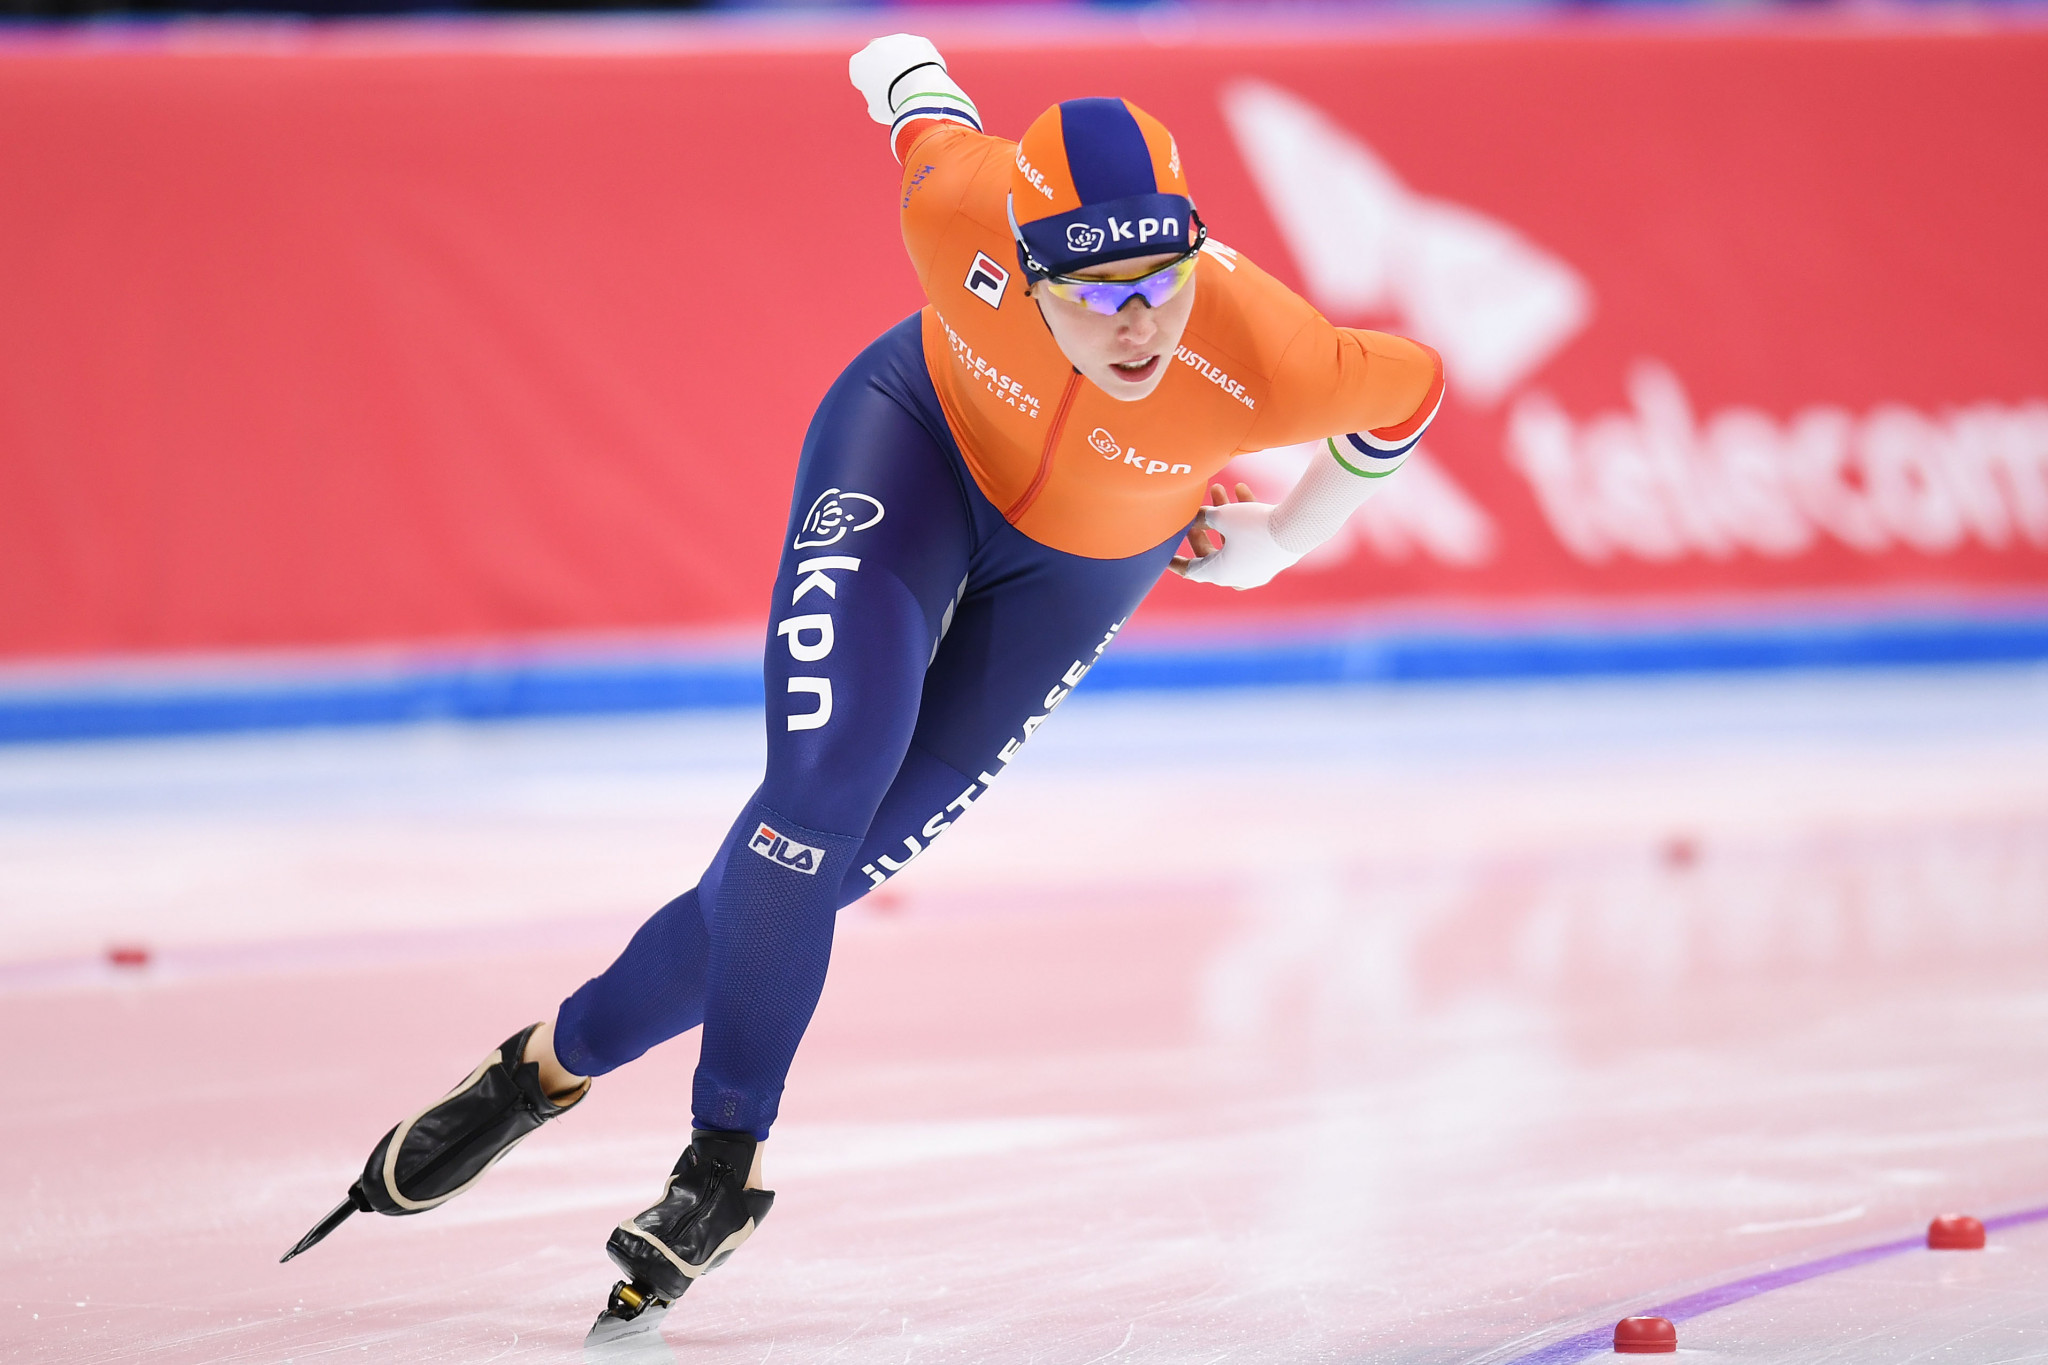 Dutch skater Antoinette de Jong qualified fastest today in the women's 500m and 3,000m allround at the European Speed Skating Championships in Collalbo ©Getty Images